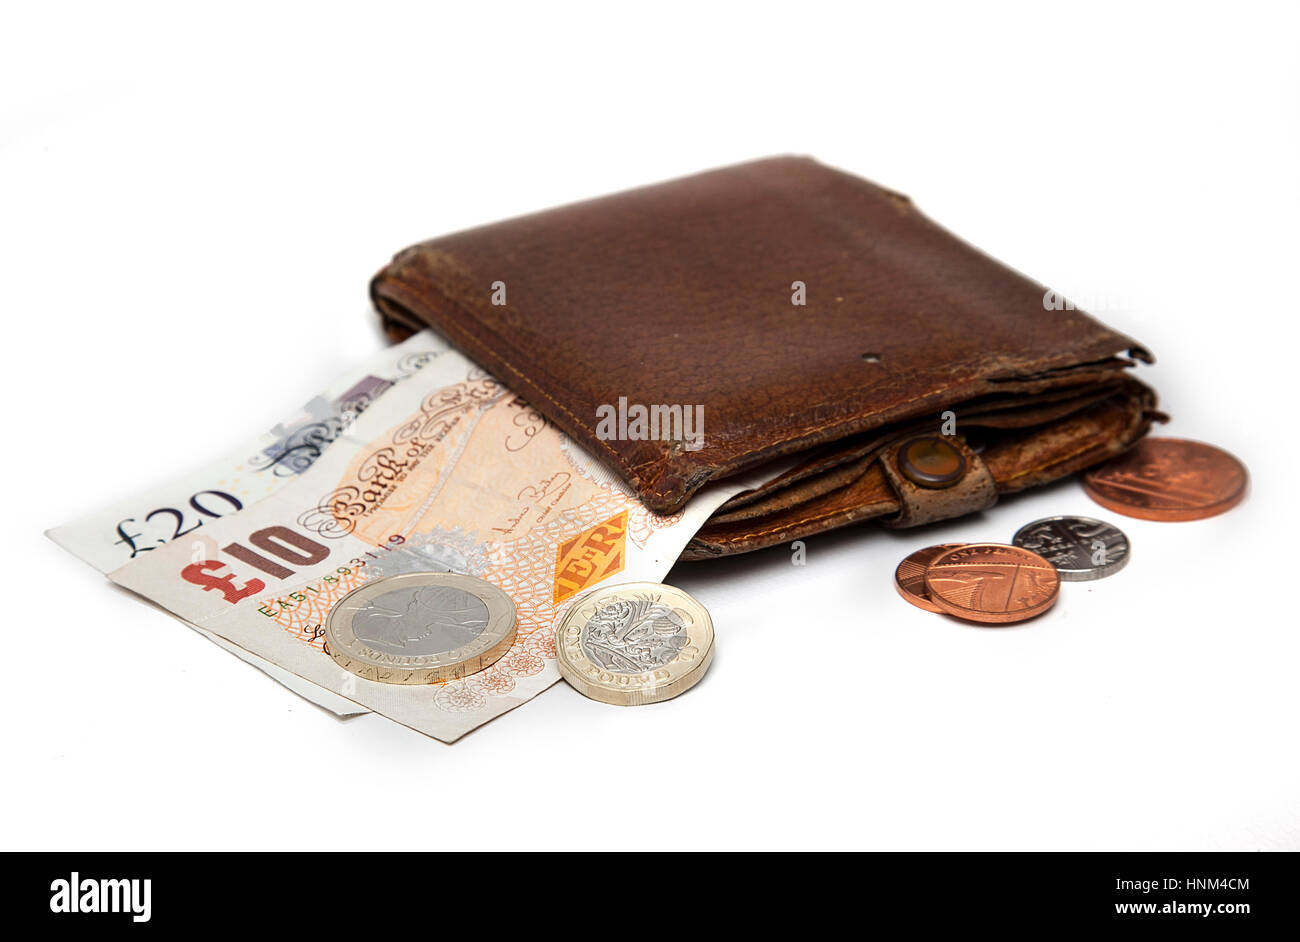 Wallet with british money, banknotes and coins Stock Photo